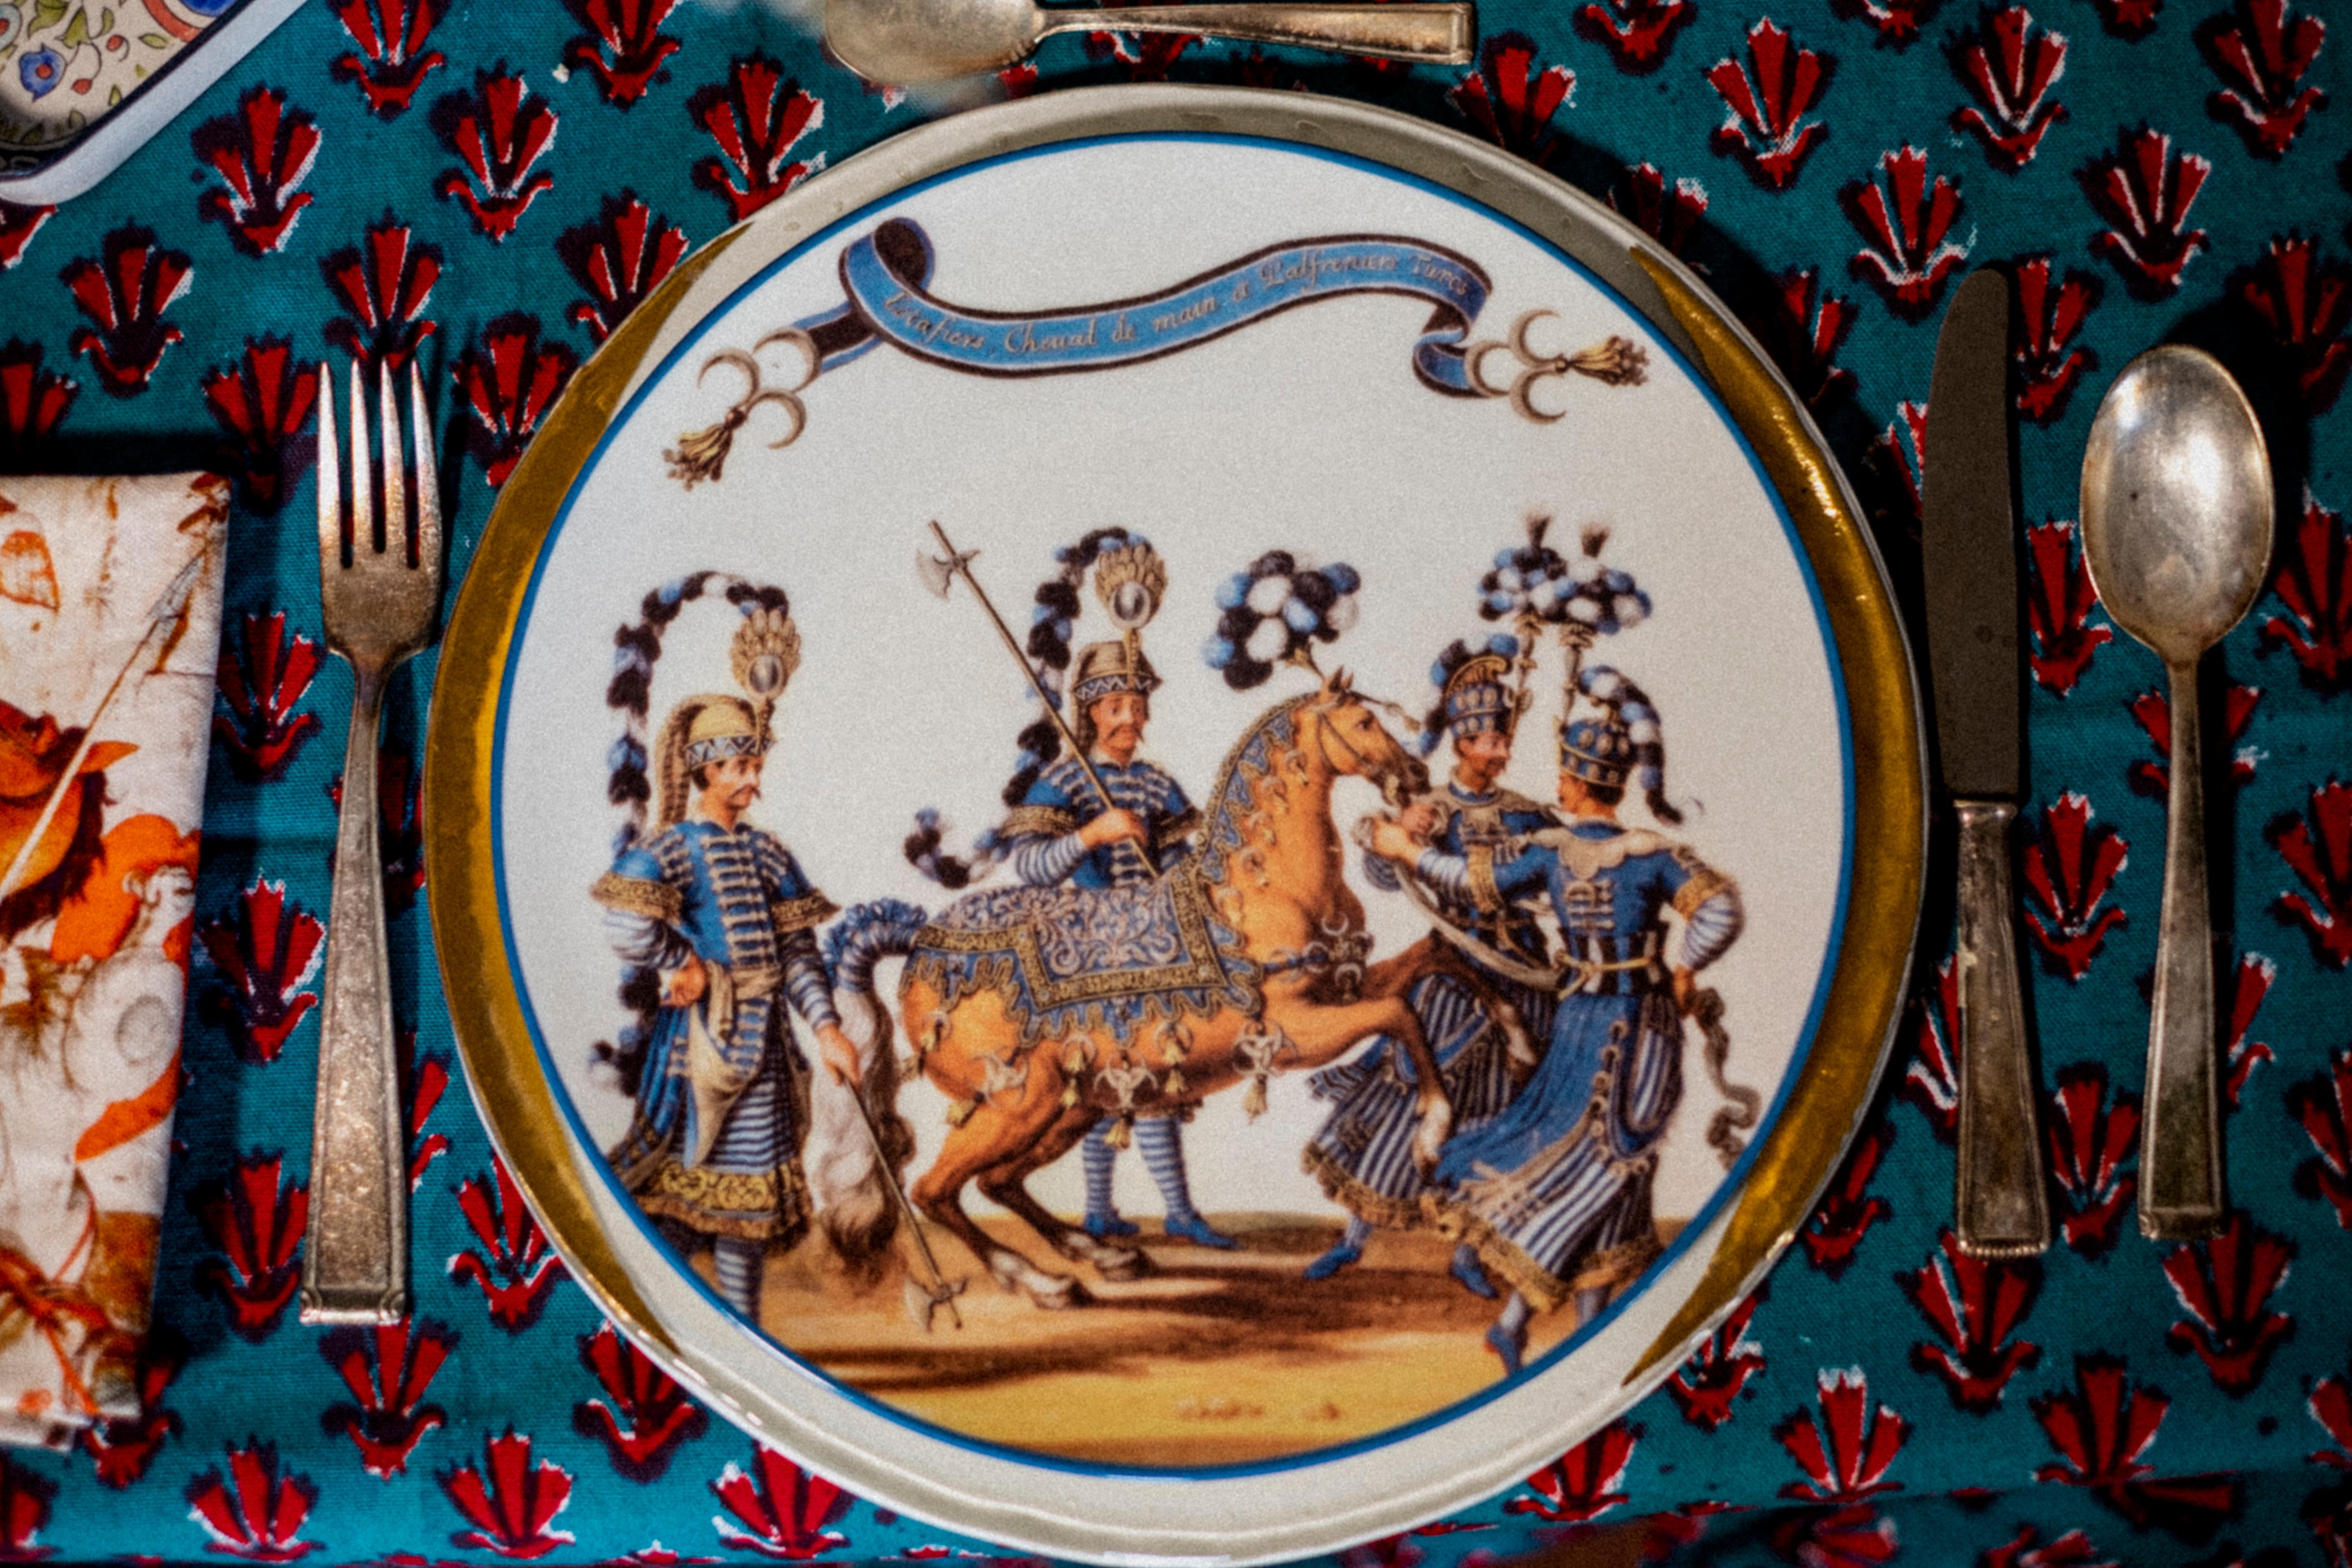 An hommage to the Carousel that the king Louis XIV gave to the Louvre for the birth of his son. 
The Turkish caracthers were very well represented by the 'noblesse' of the Kingdom in a sort of revisited Turquerie.